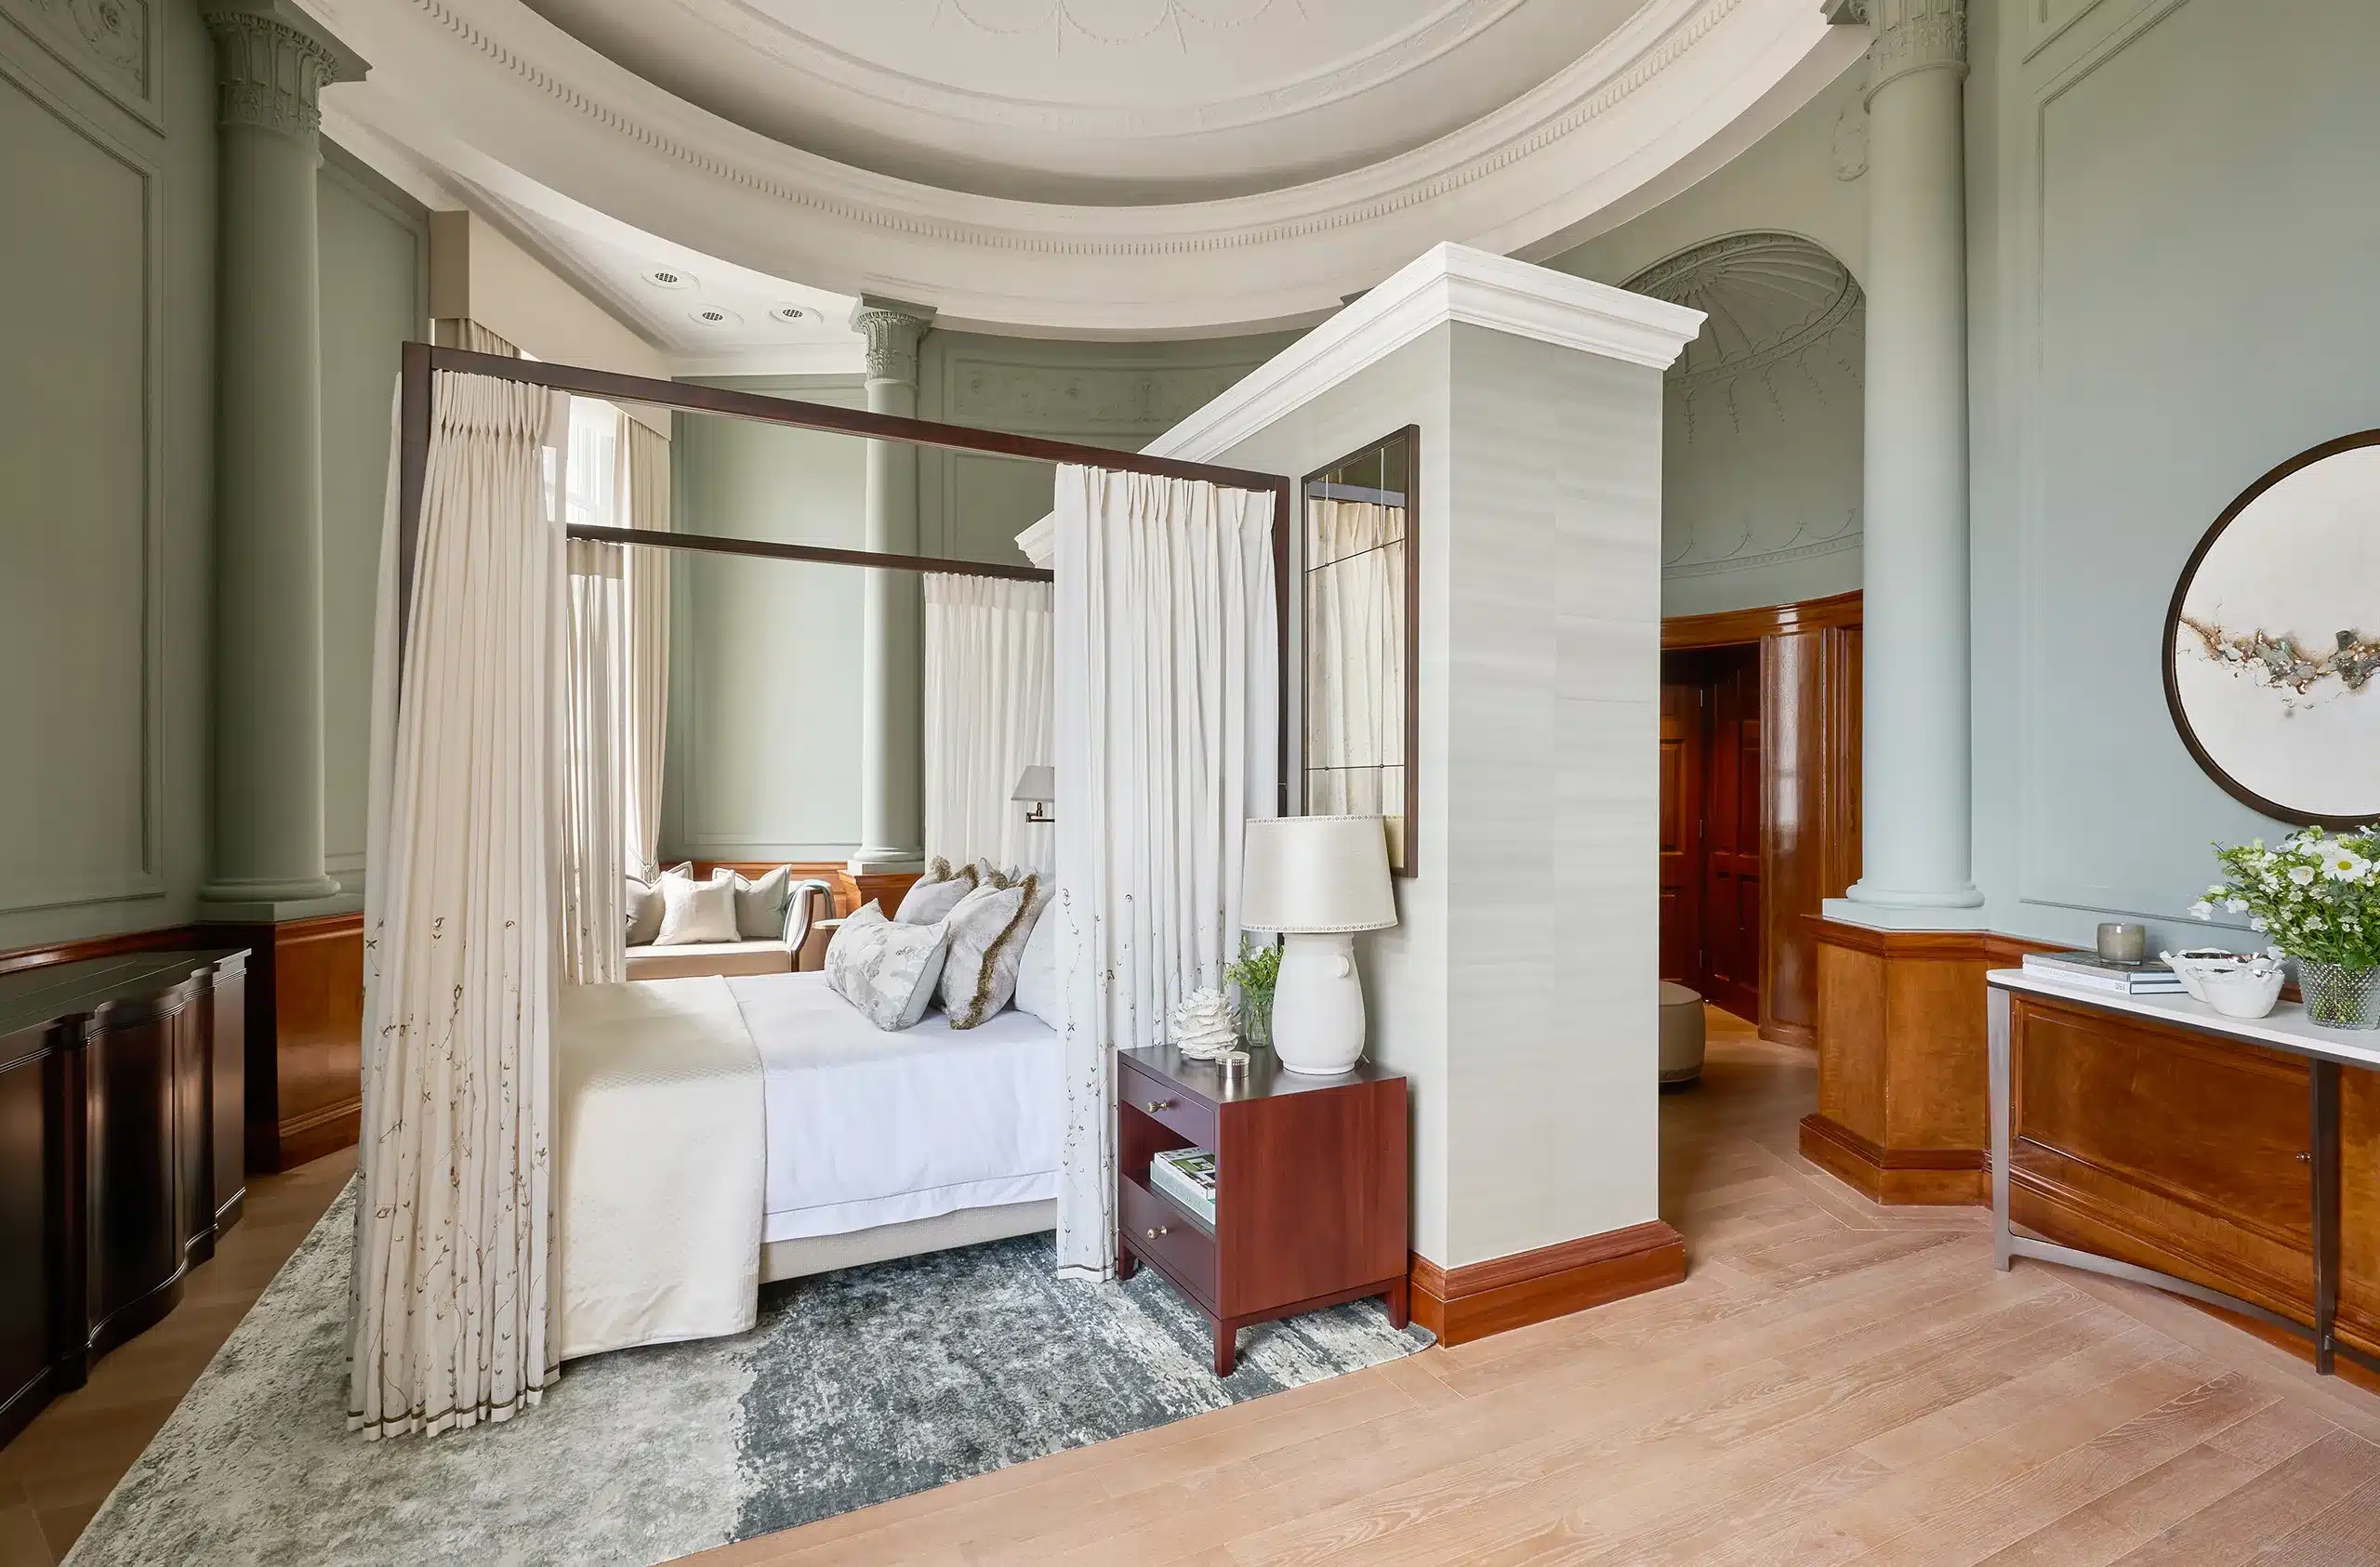 The master bedroom at the uk's best interior designer, Katharine Pooley's Millbank interior design project in central london, next to westminster